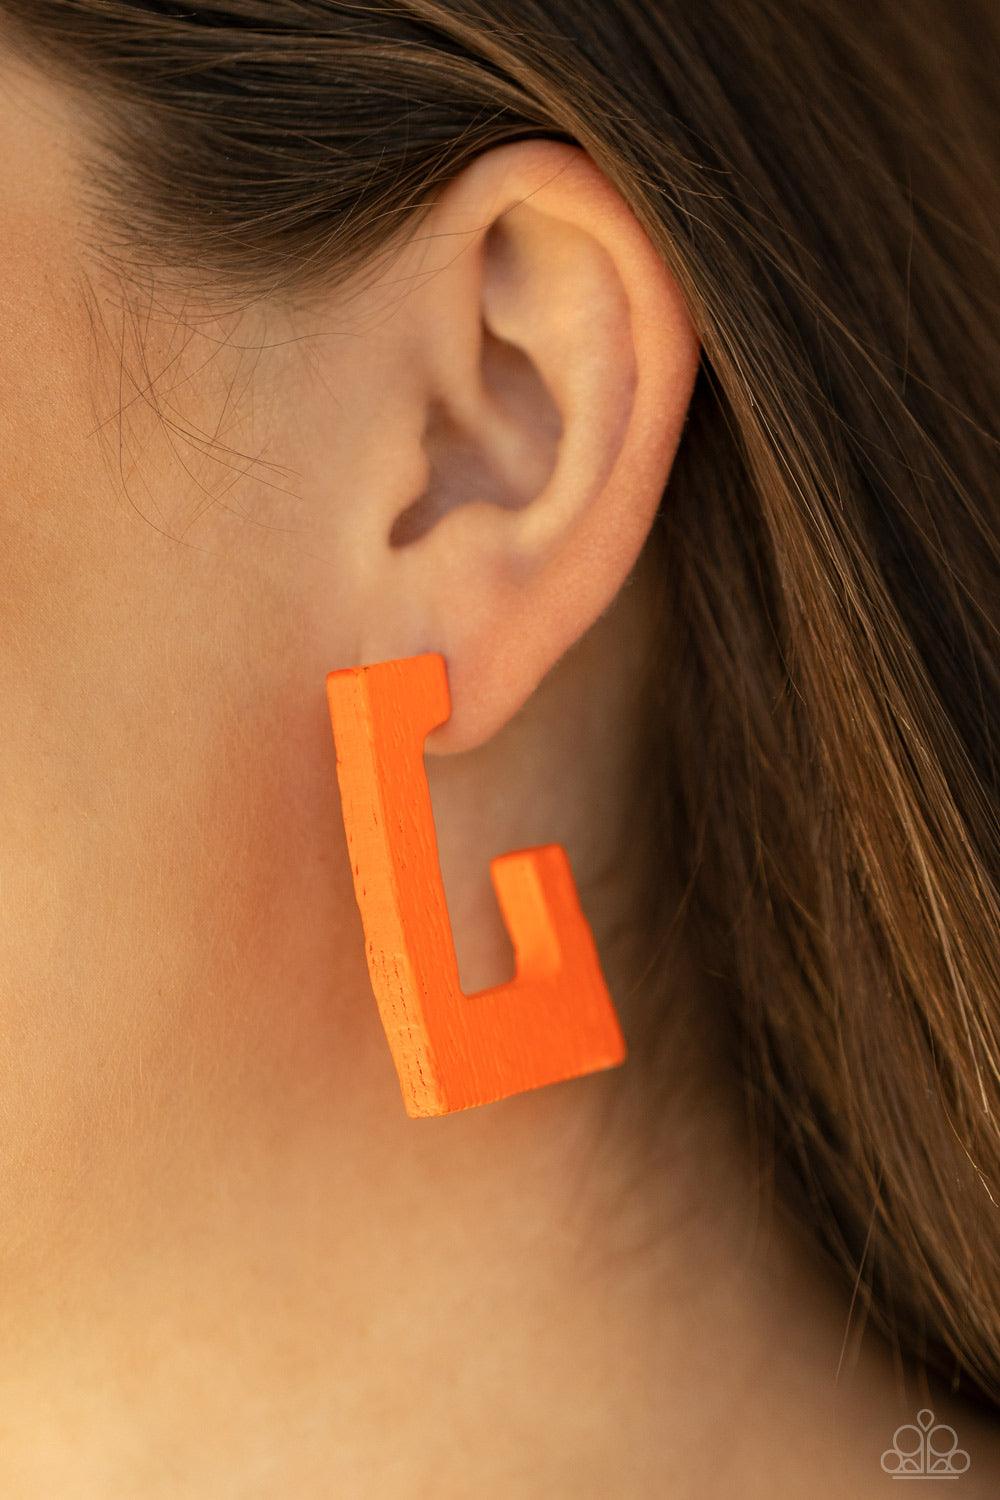 Paparazzi Accessories The Girl Next OUTDOOR - Orange Painted in a neon orange finish, a distressed wooden frame curves around the ear, creating a rectangular hoop for a retro effect. Earring attaches to a standard post fitting. Hoop measures approximately